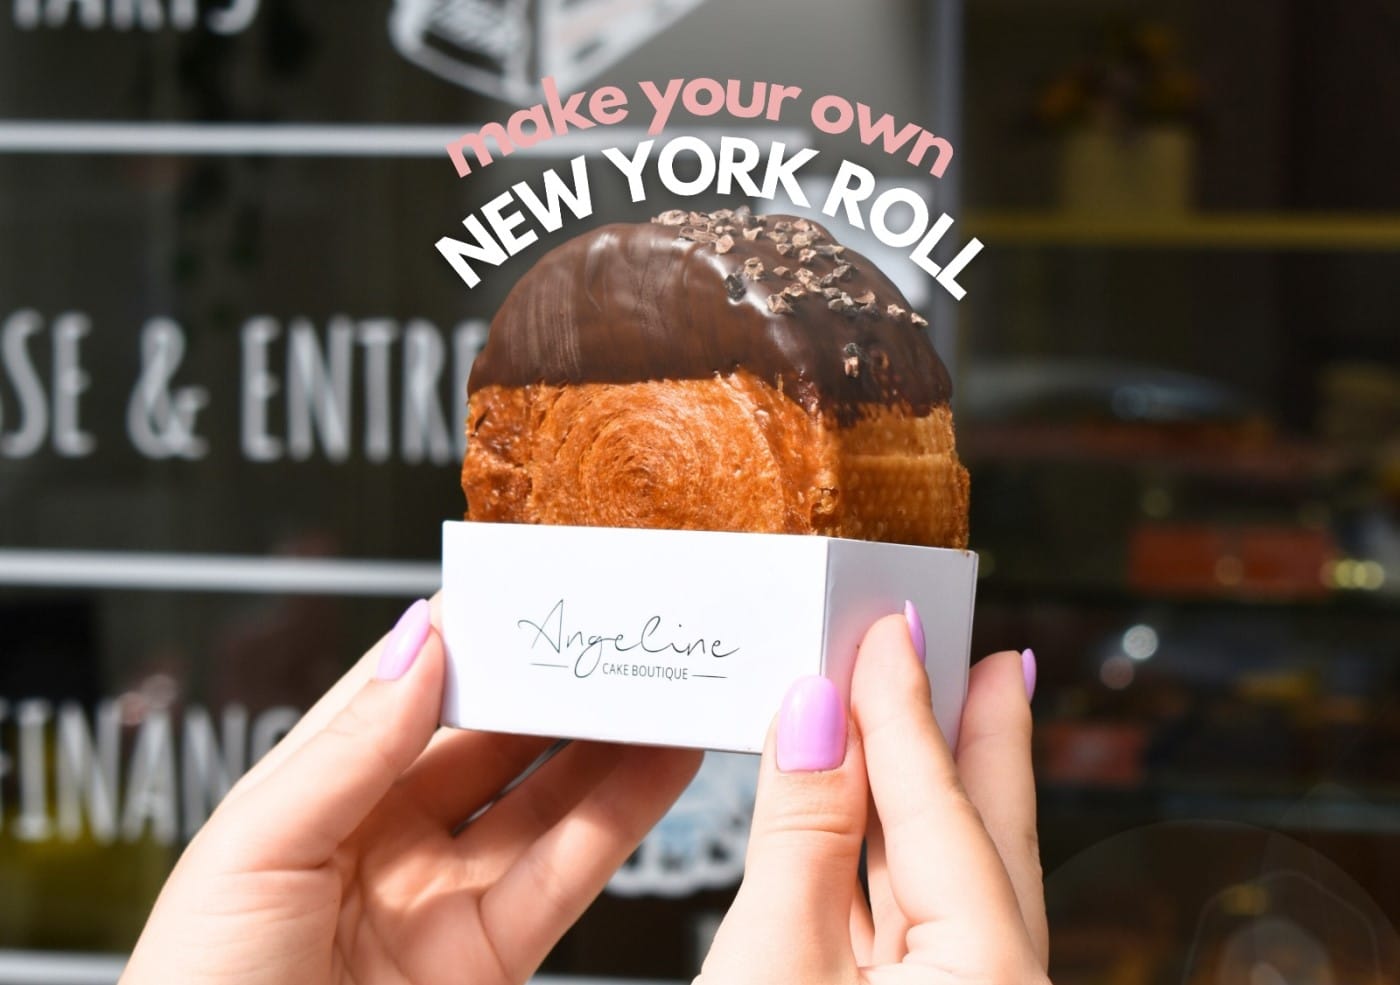 Make your own New York Roll la Angeline Cake Boutique!